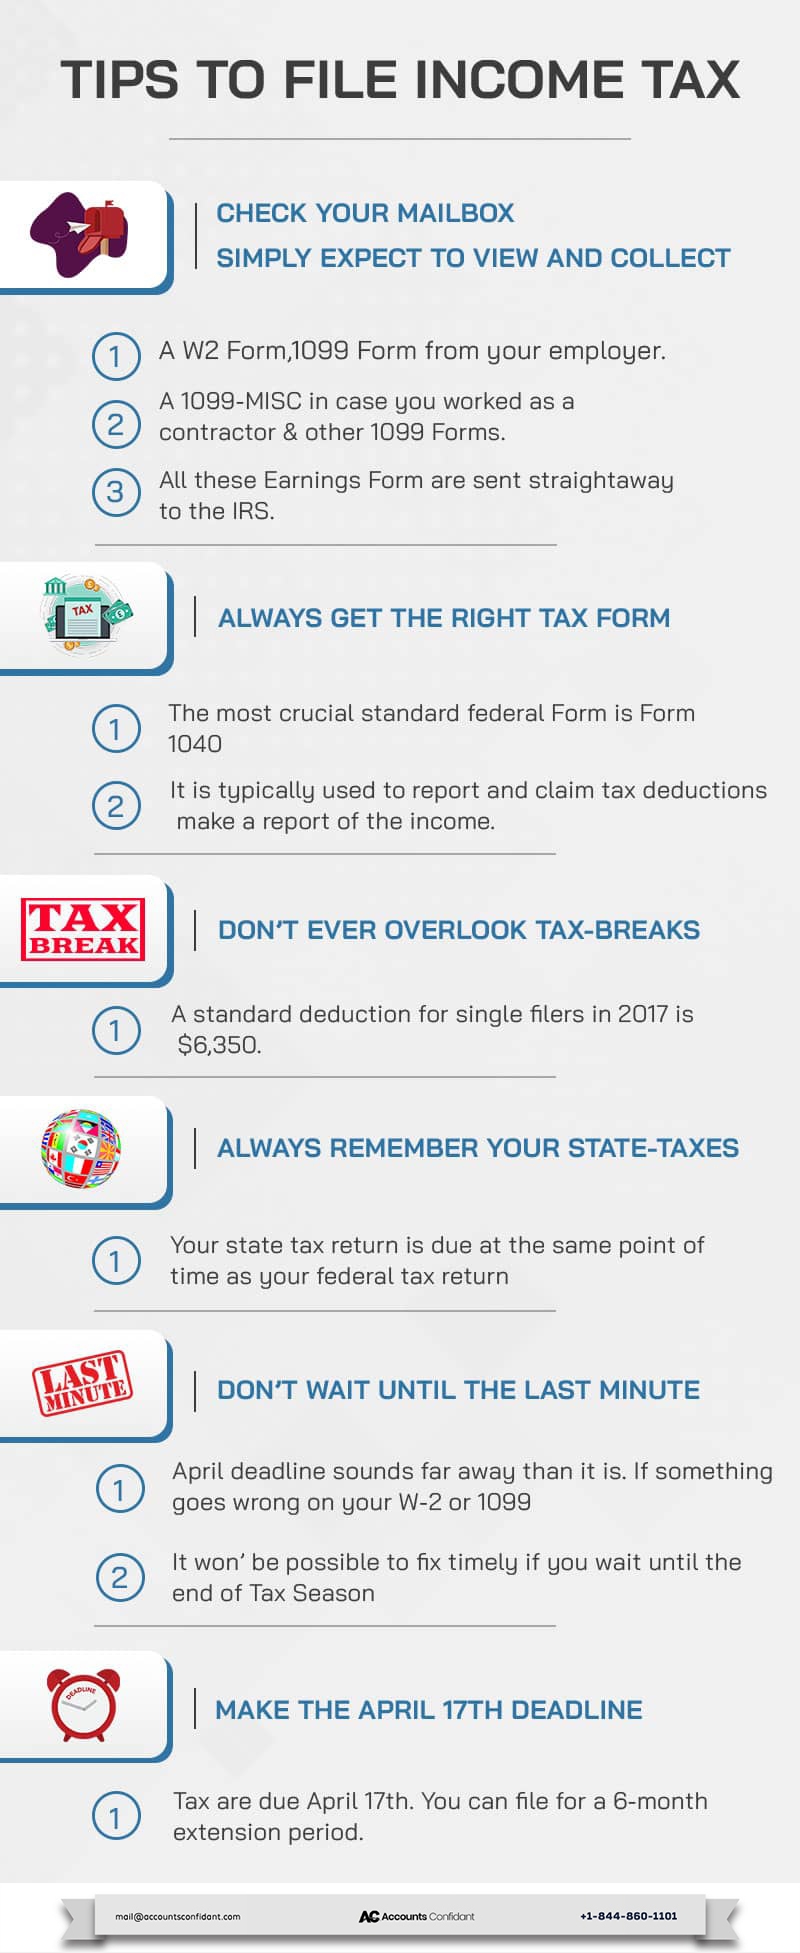 How to File Income Tax